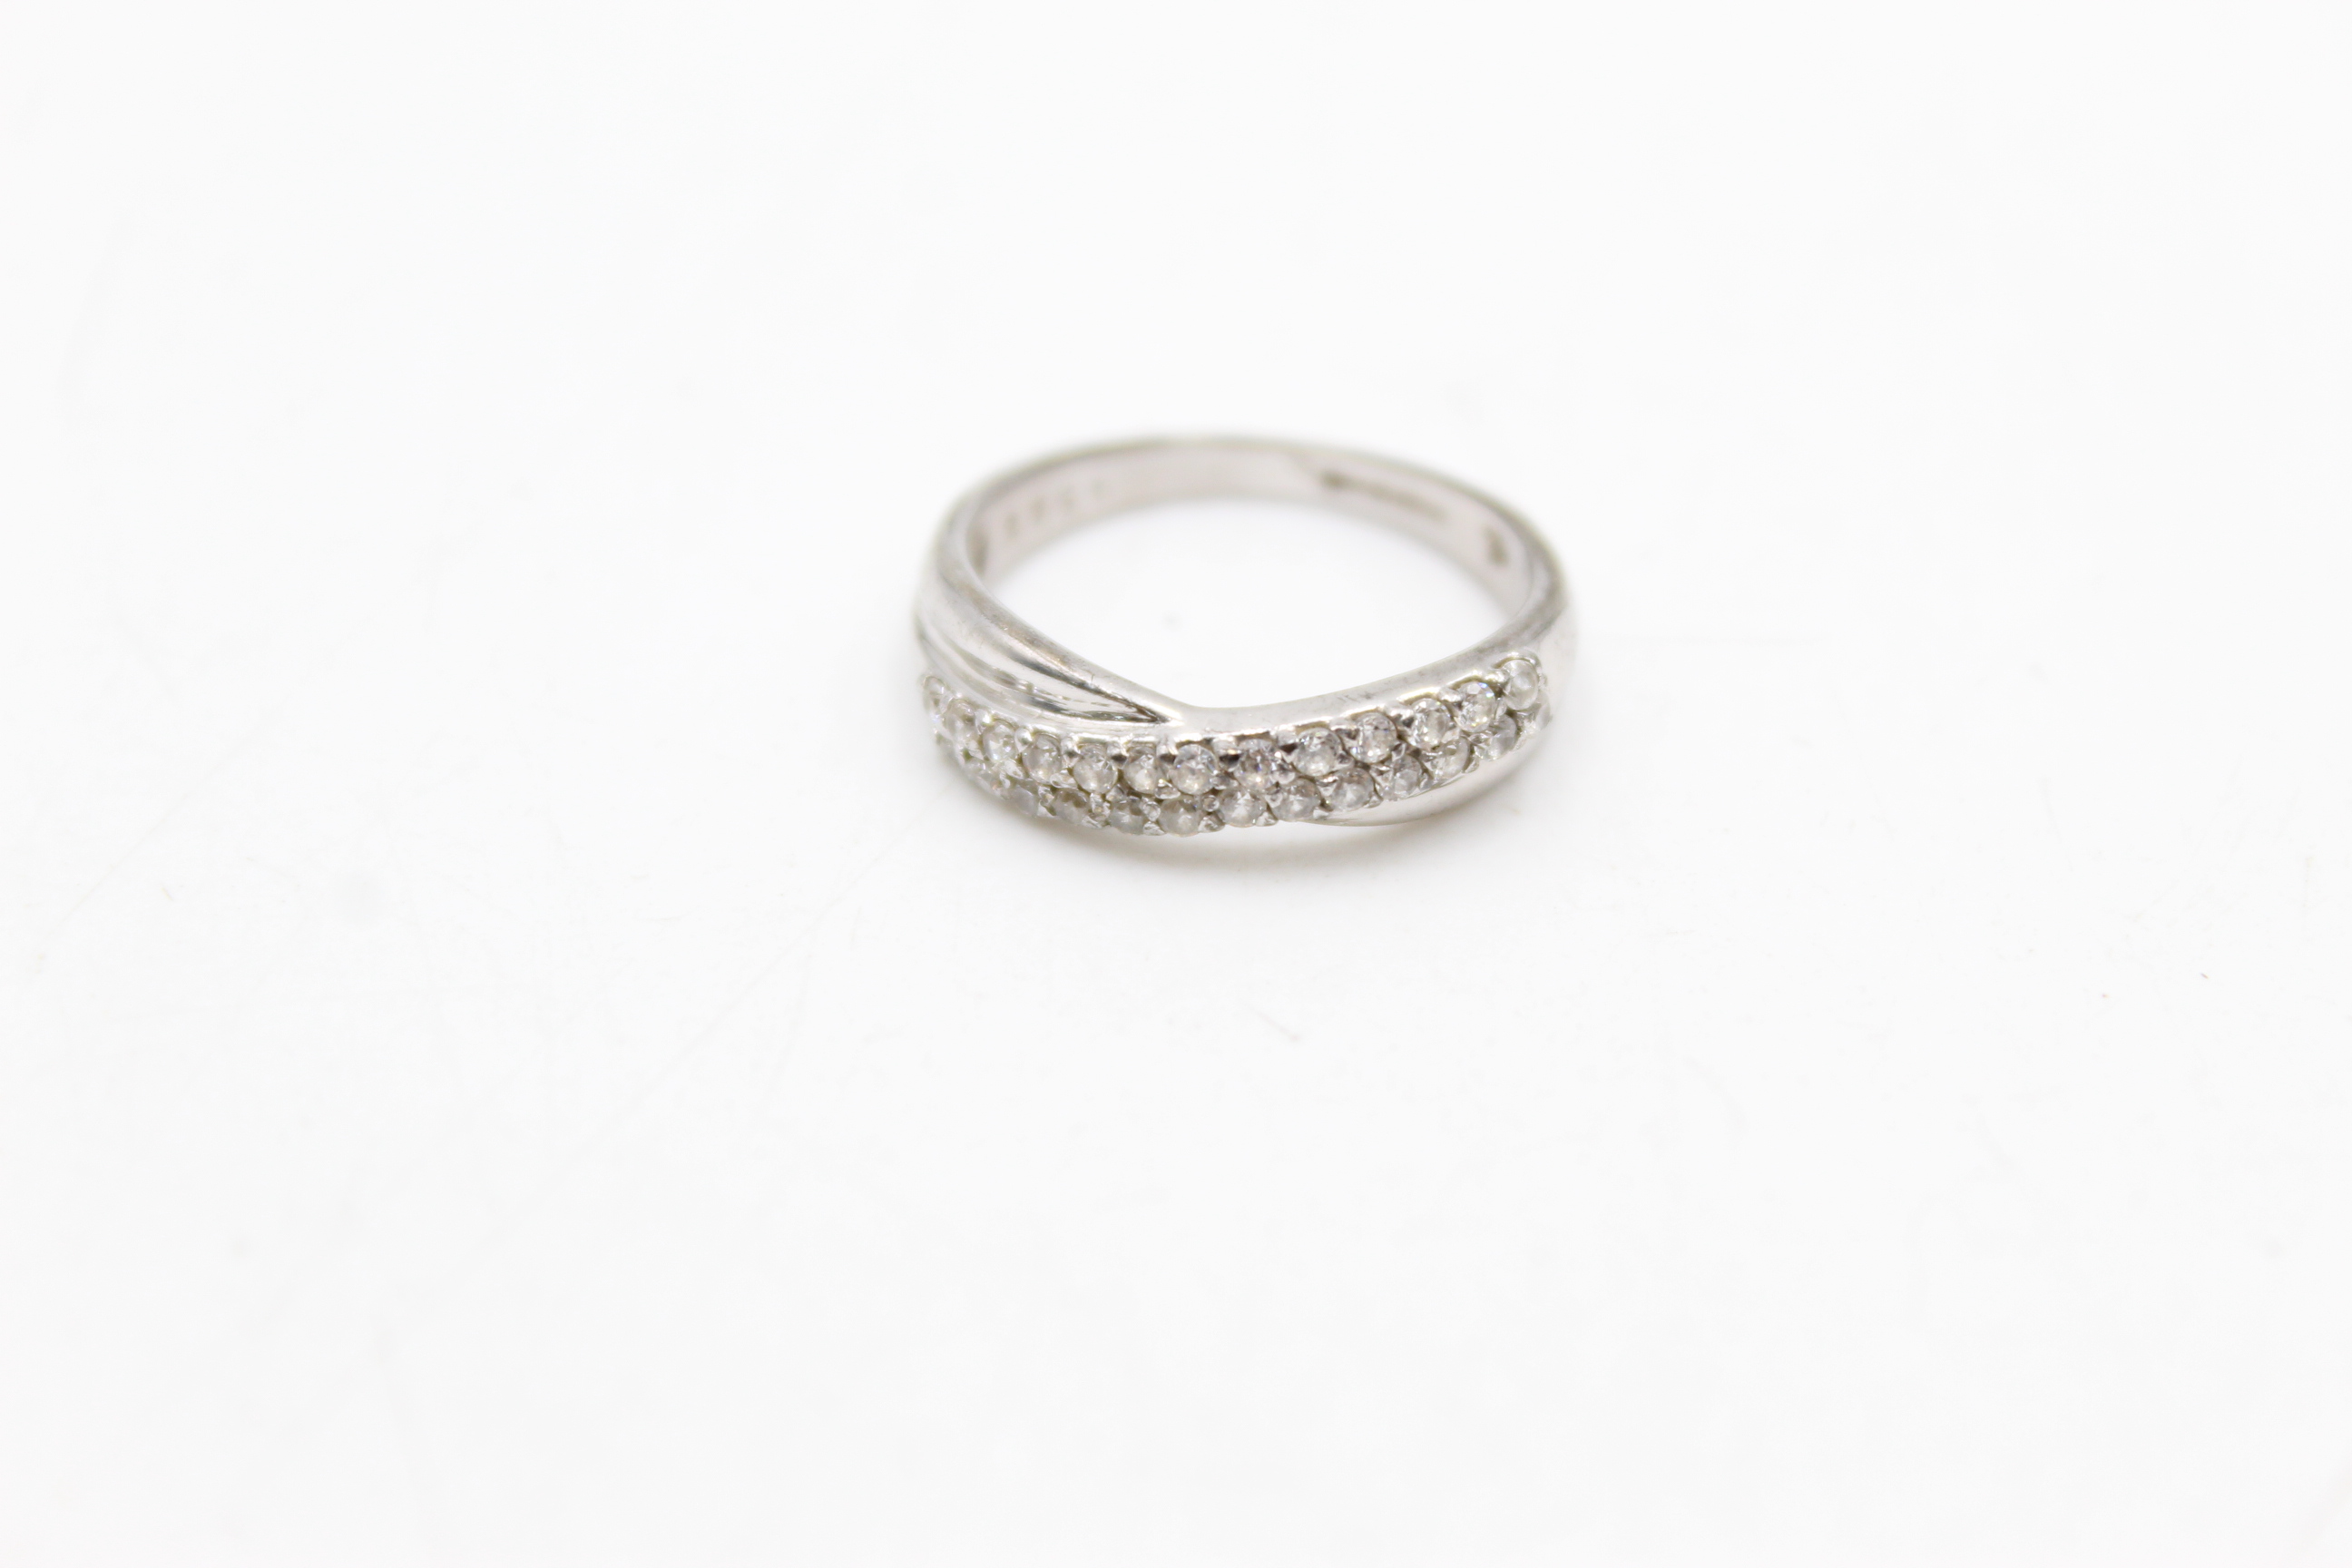 9ct gold clear gemstone crossover band half eternity ring (3g) - Image 2 of 6